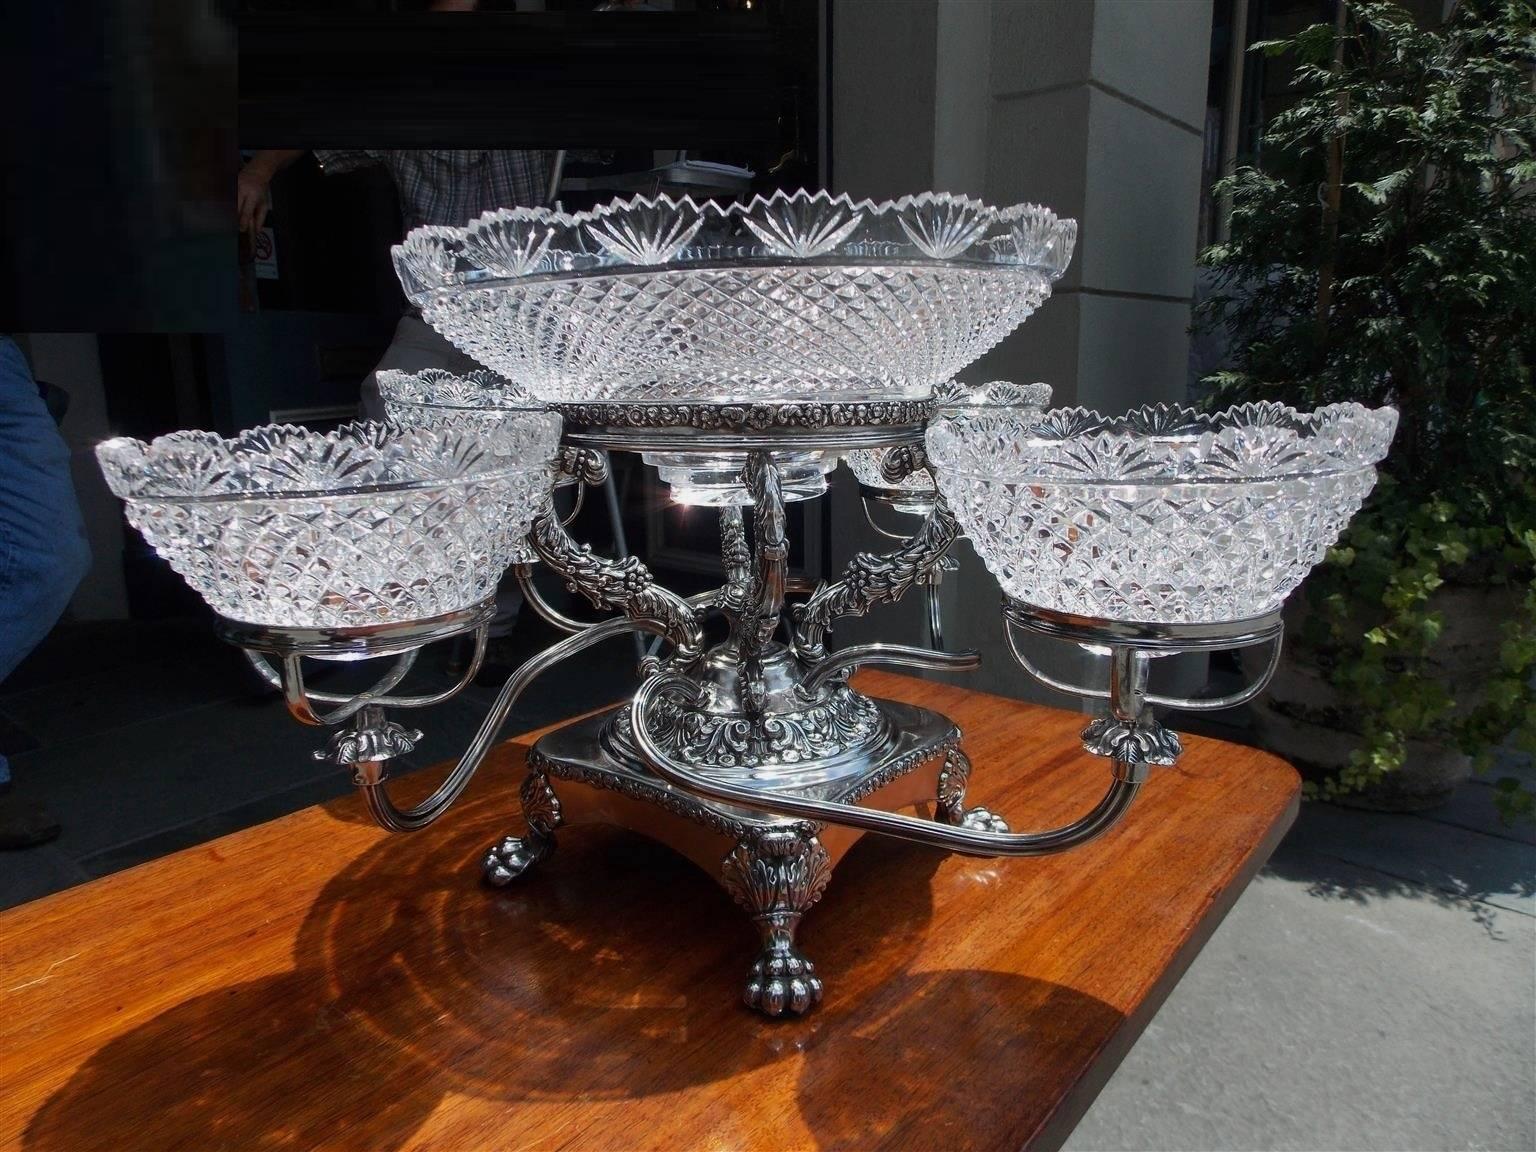 English Sheffield epergne with a centered cut crystal bowl, four scrolled arms with fitted crystal bowls, chased vine & berry motif throughout, and terminating on a squared base with acanthus & lions paw feet. Early 19th century.